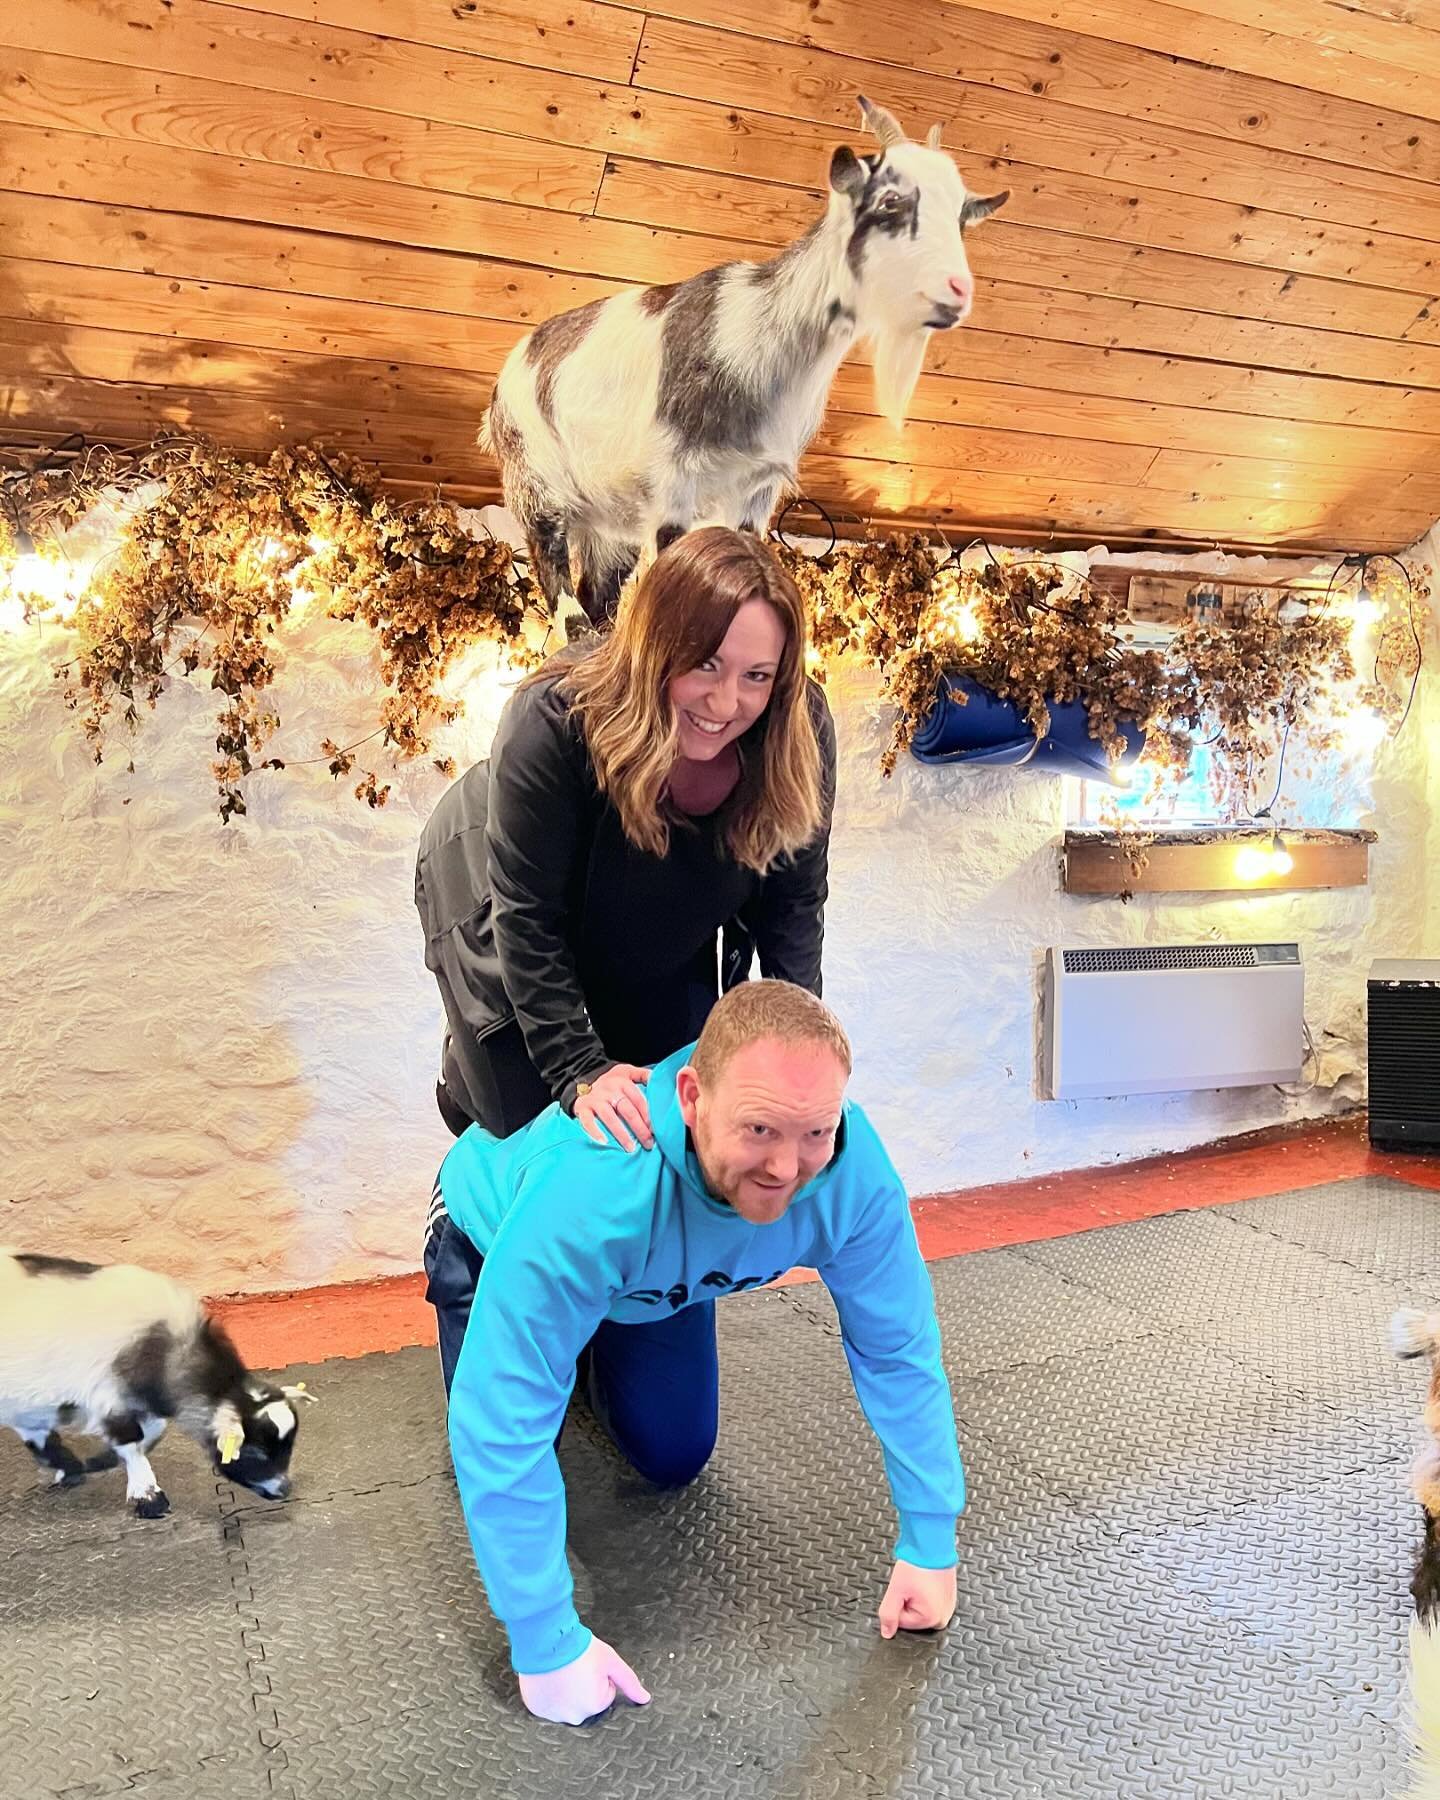 We are nearly sold out again! There&rsquo;s a few tickets left on April 28th, grab them quick! @thepilatesattic 

#goats #pygmygoats #pilates #goatpilates #pygmygoatpilates #goatsofinstagram #goatyoga #edinburgh #fife #scotland #ilovegoats